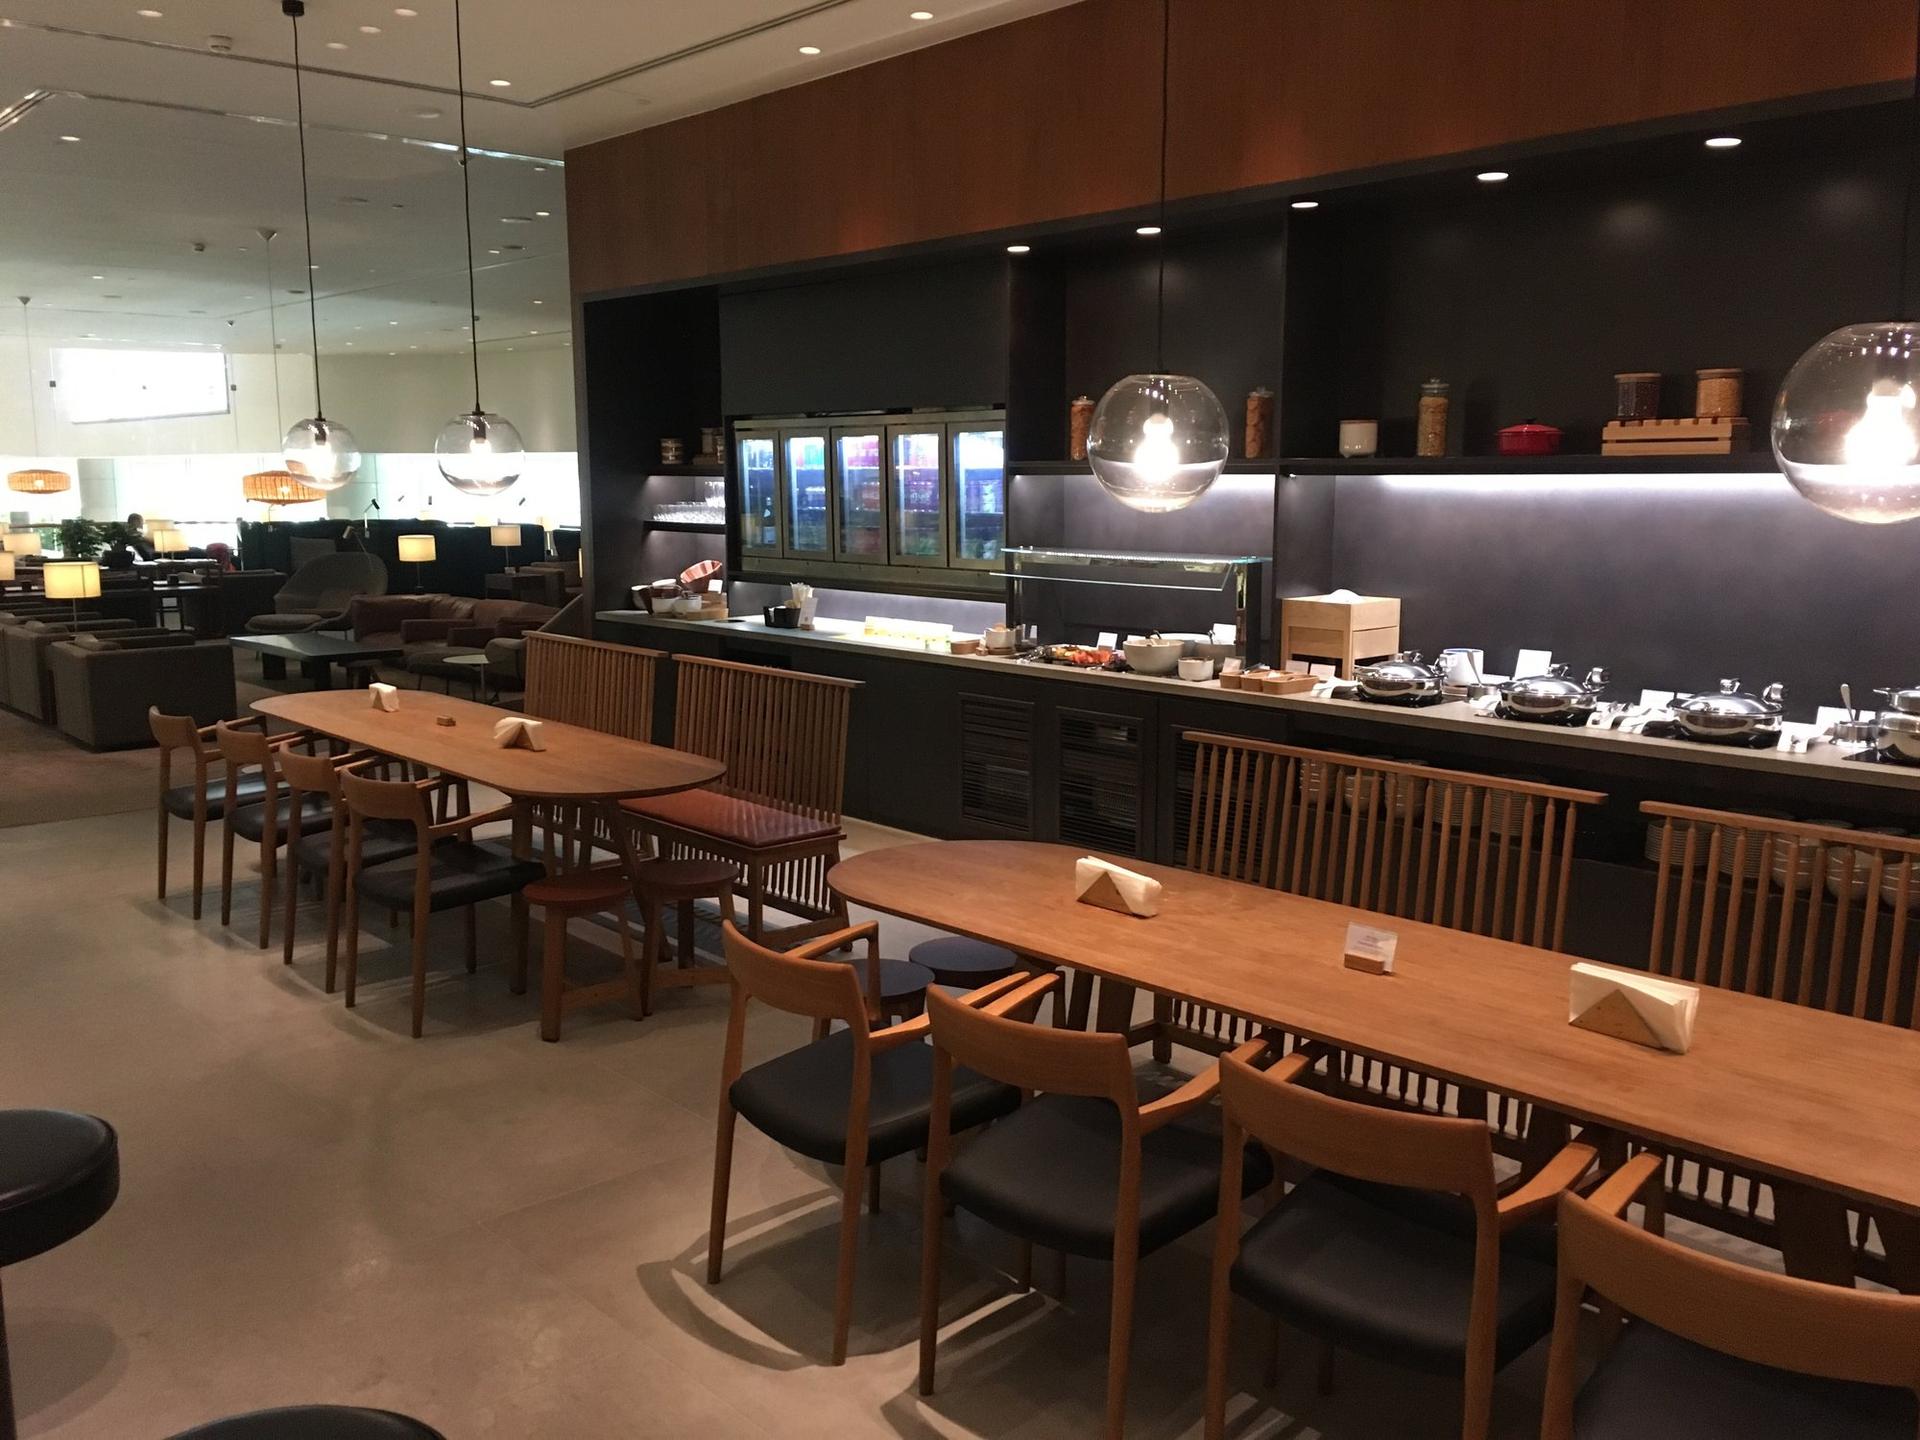 Cathay Pacific Lounge image 36 of 60